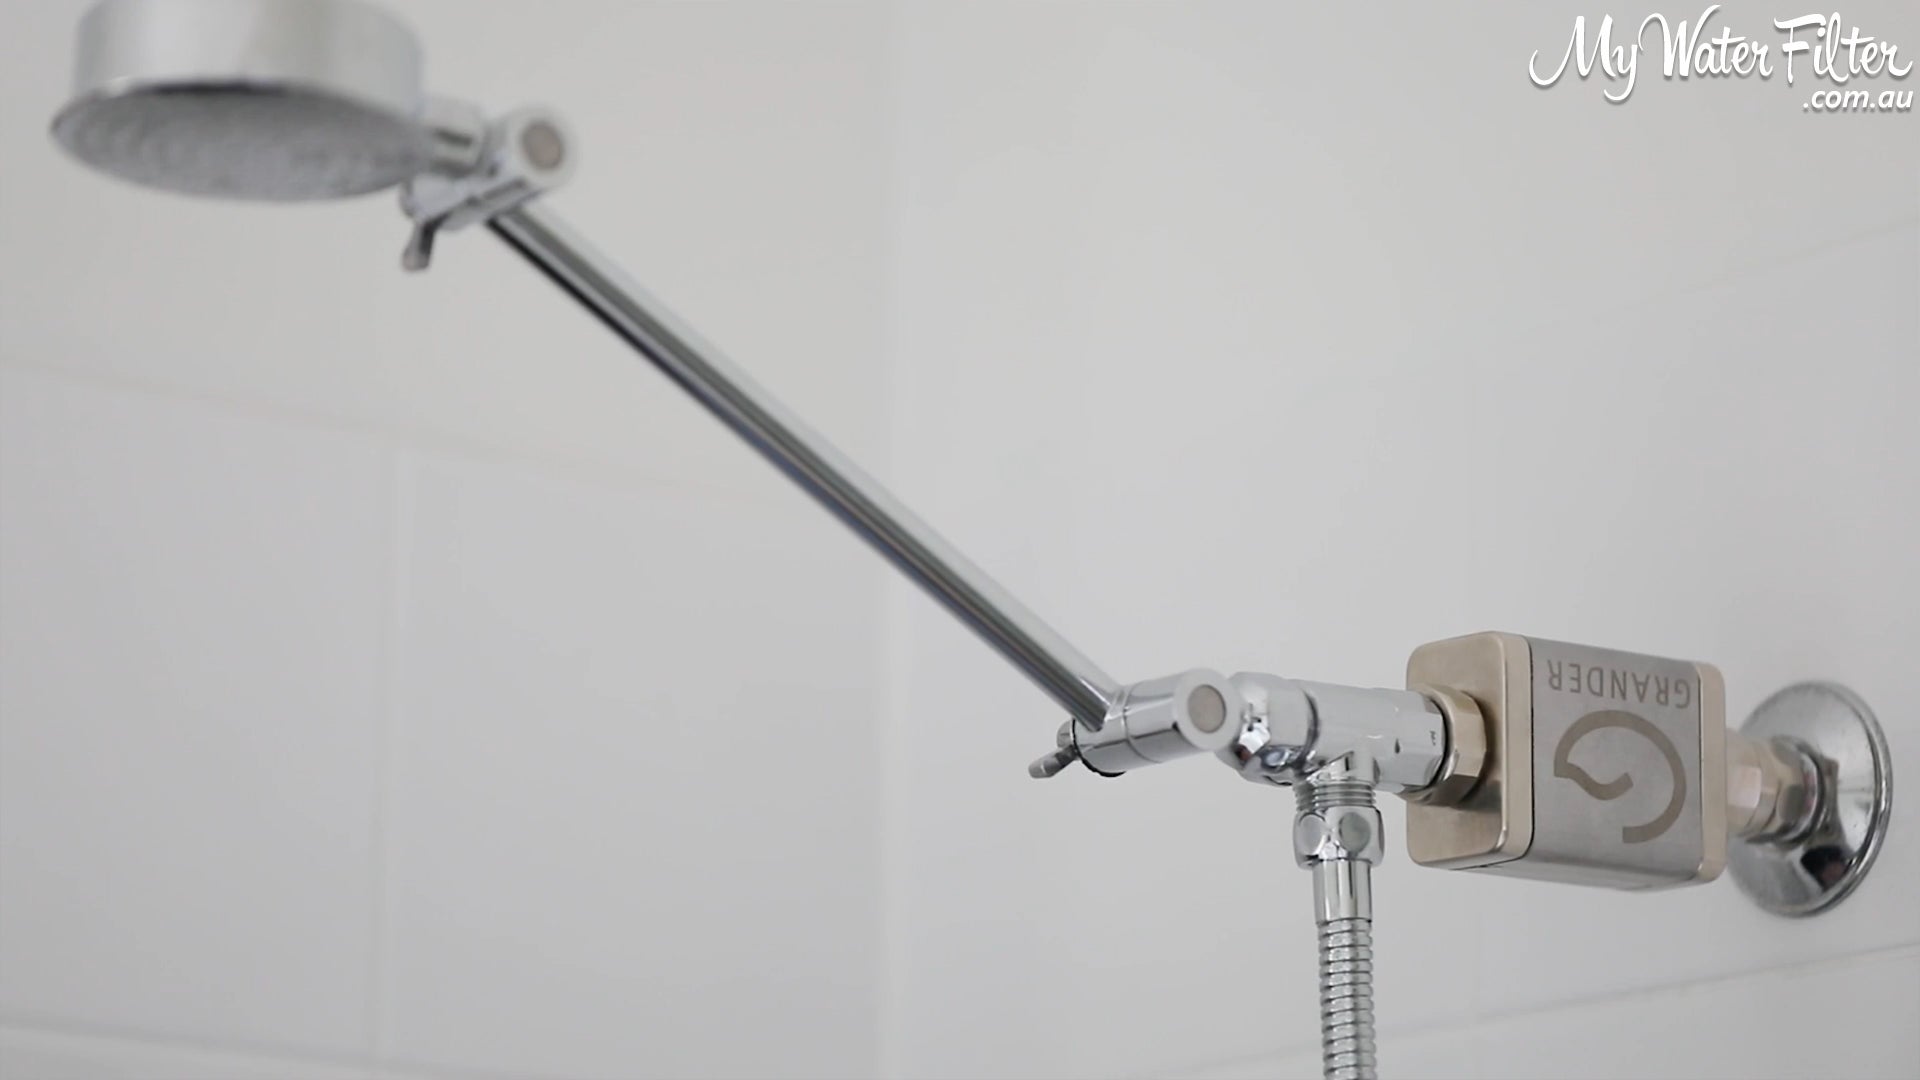 Grander connected to the wall shower